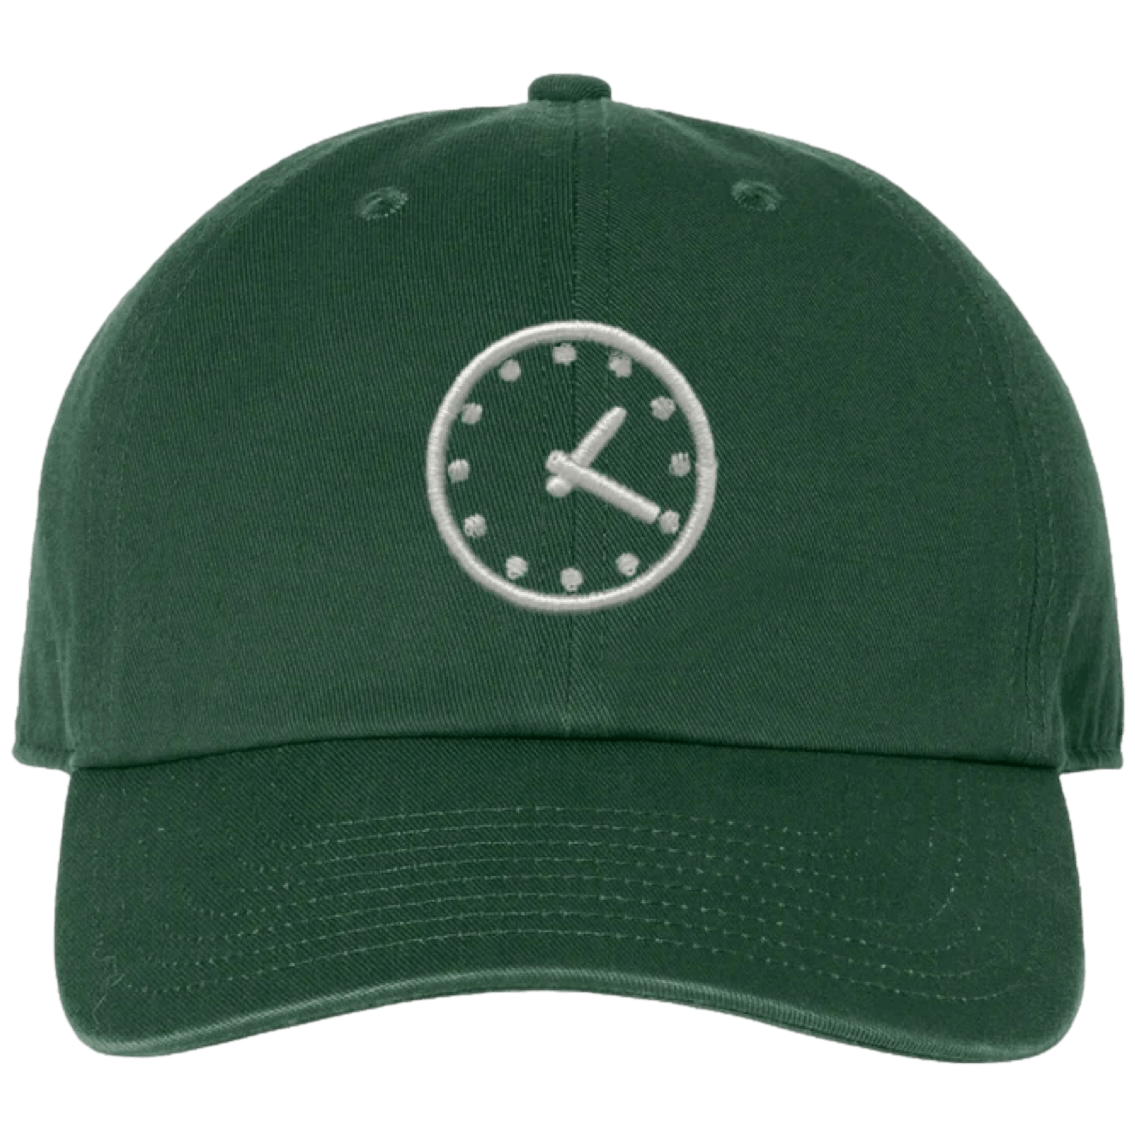 WRIGLEY CLOCK DAD HAT. - OBVIOUS SHIRTS